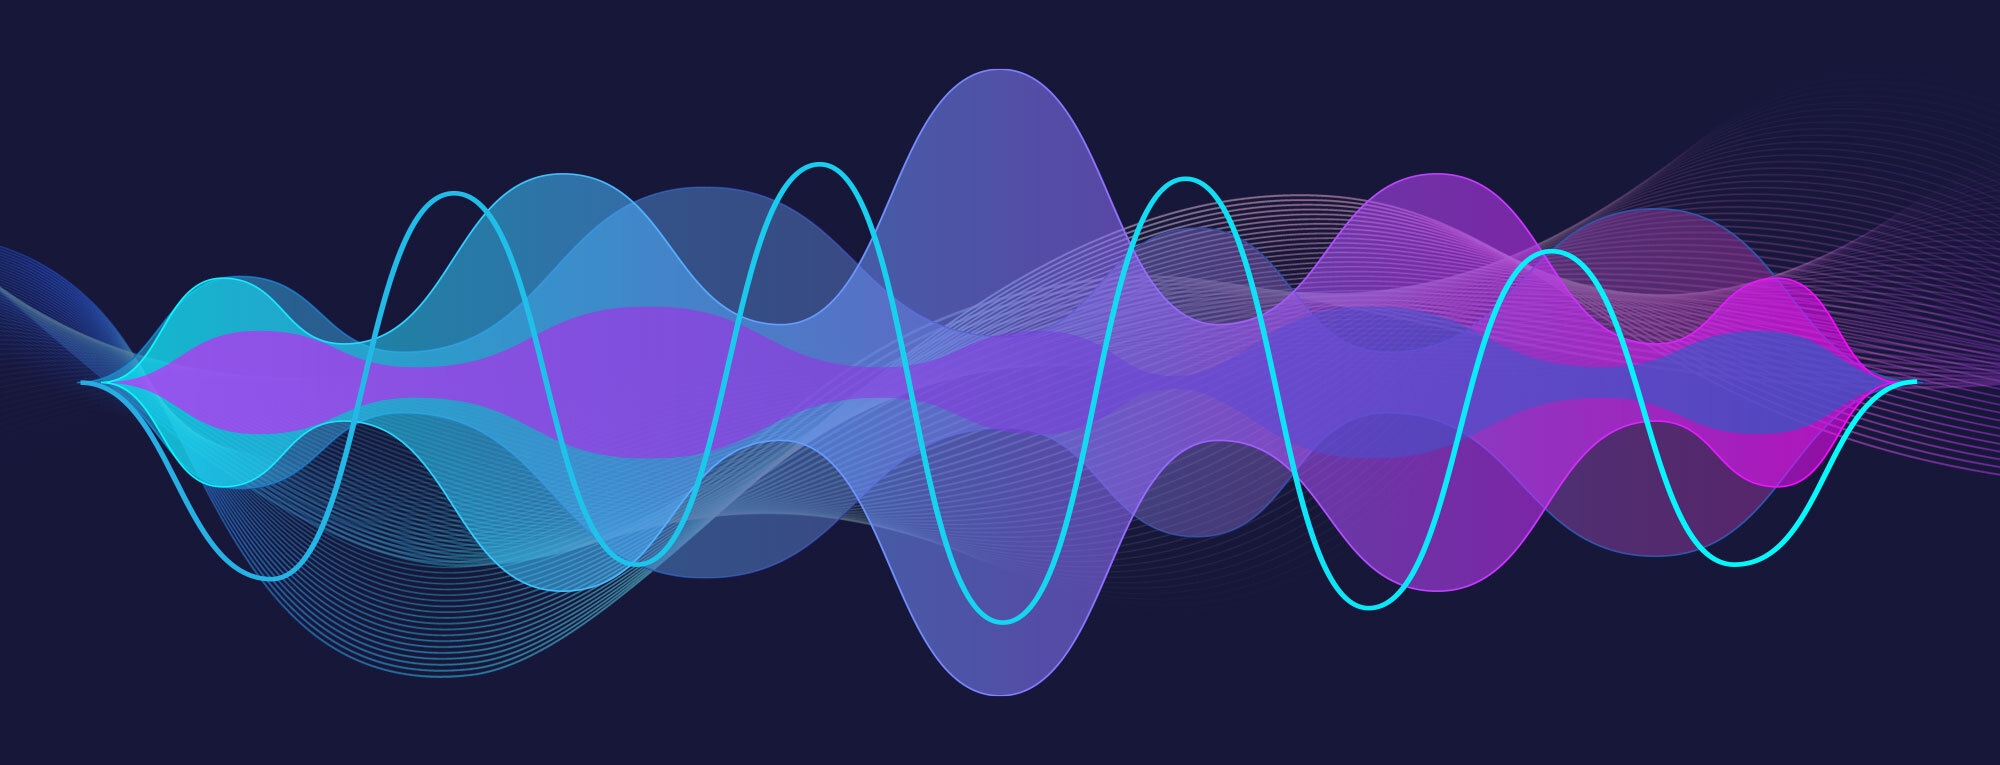 Abstract design of audio waves